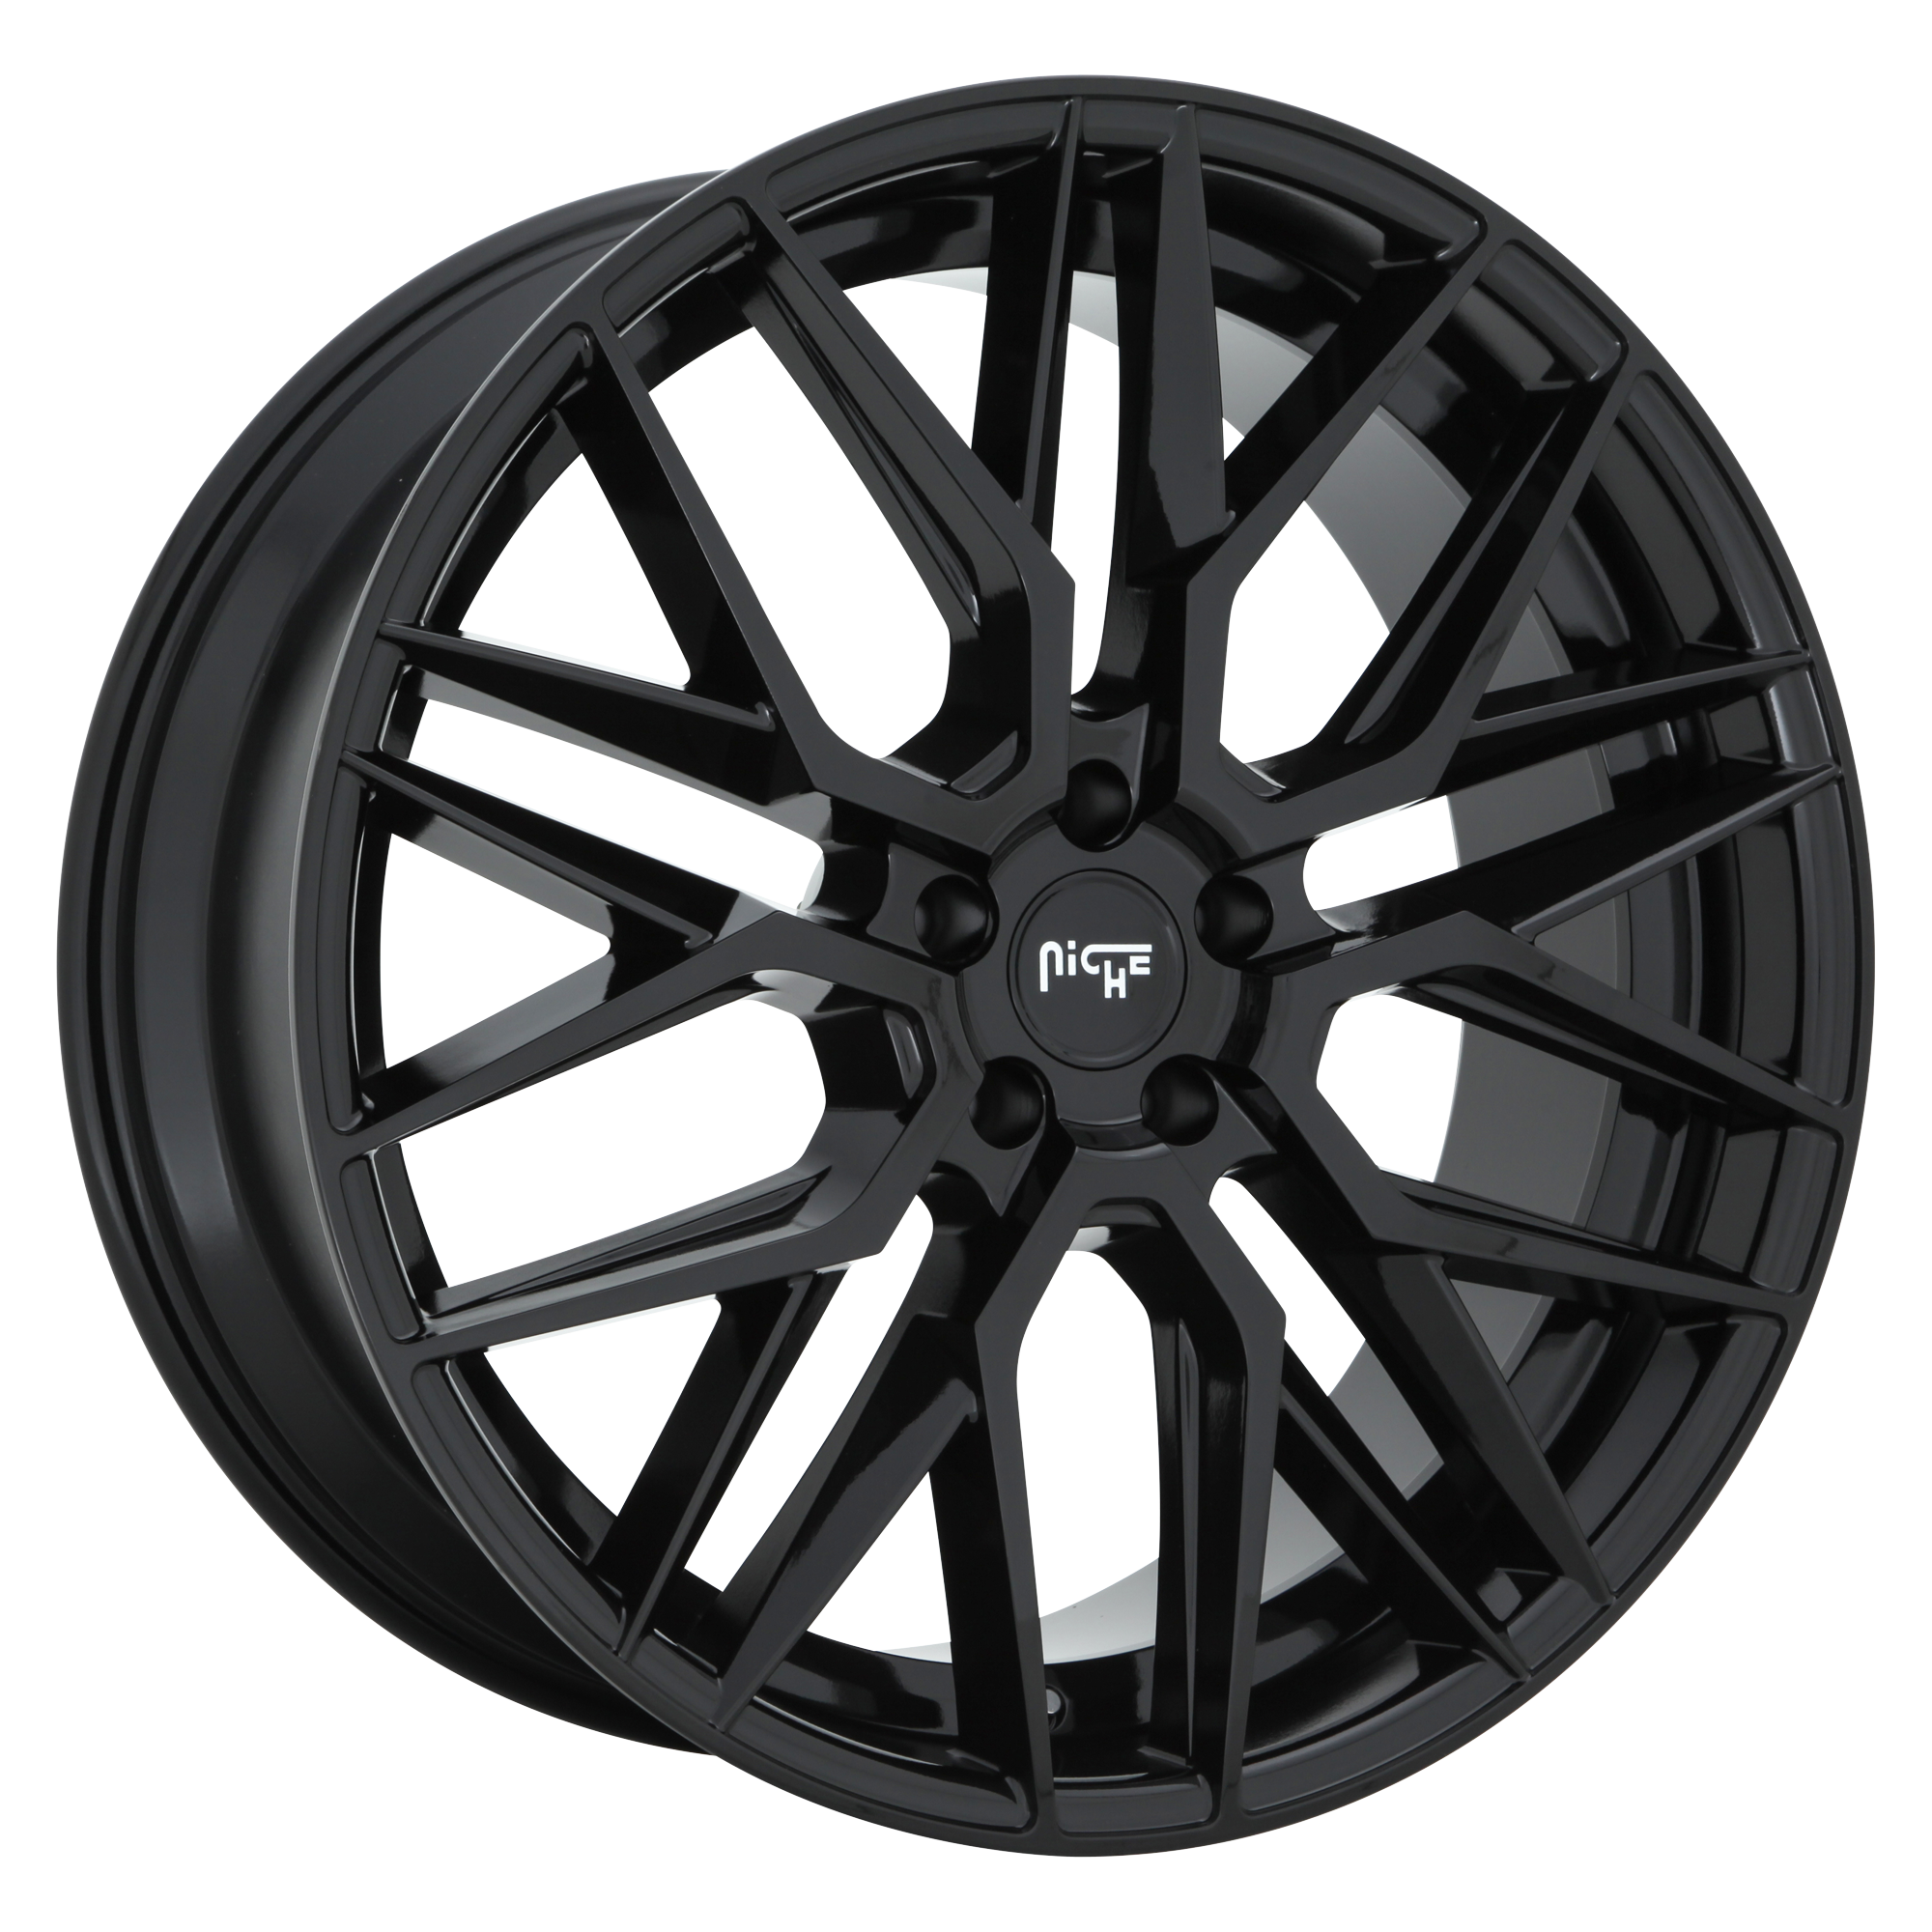 GAMMA 19x9.5 5x120.00 GLOSS BLACK (35 mm) - Tires and Engine Performance